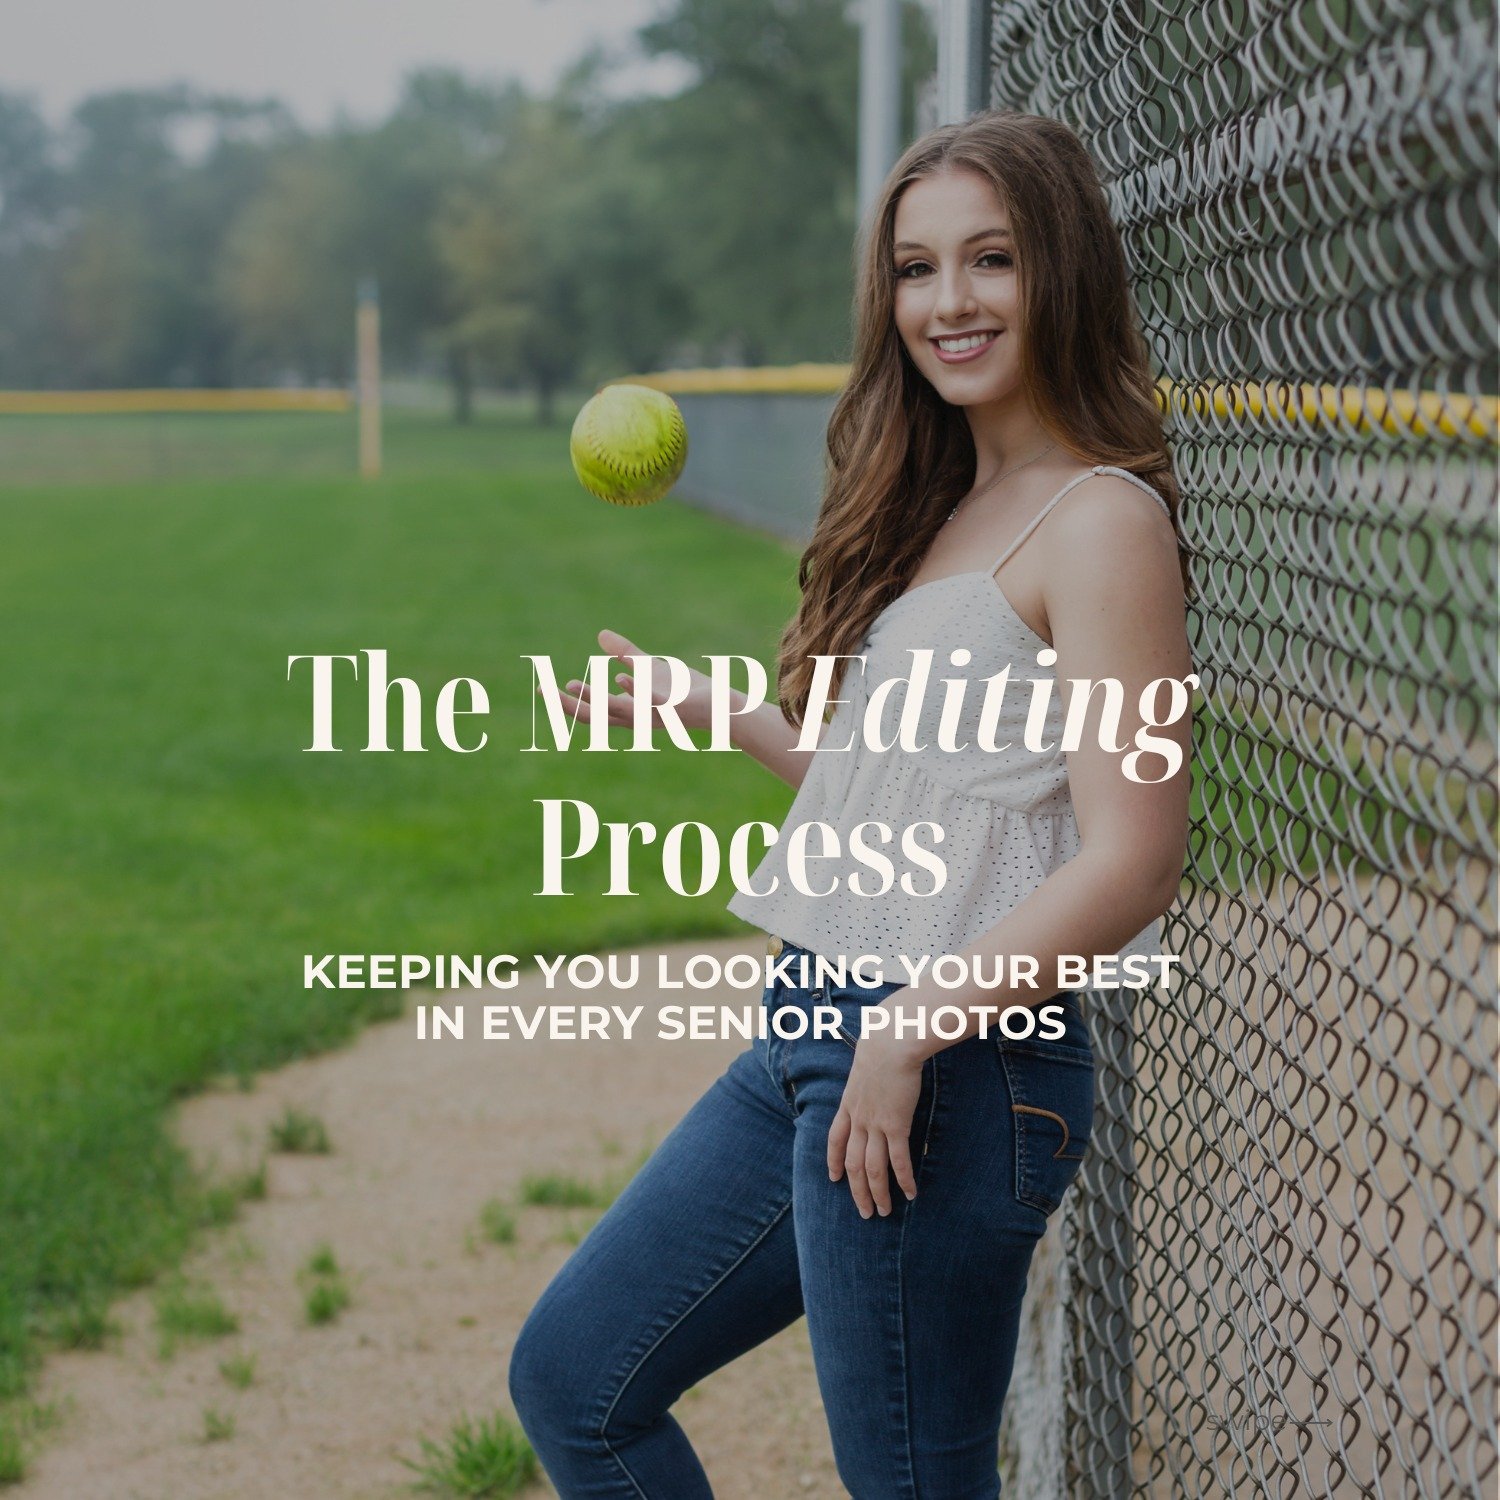 Editing plays a major role in how your photos turn out, and I put a lot of love and care into every single one from your session! 📸 Here's what goes into making them shine:

1️⃣ Hand-editing: No filters here! Each photo gets personalized attention.
